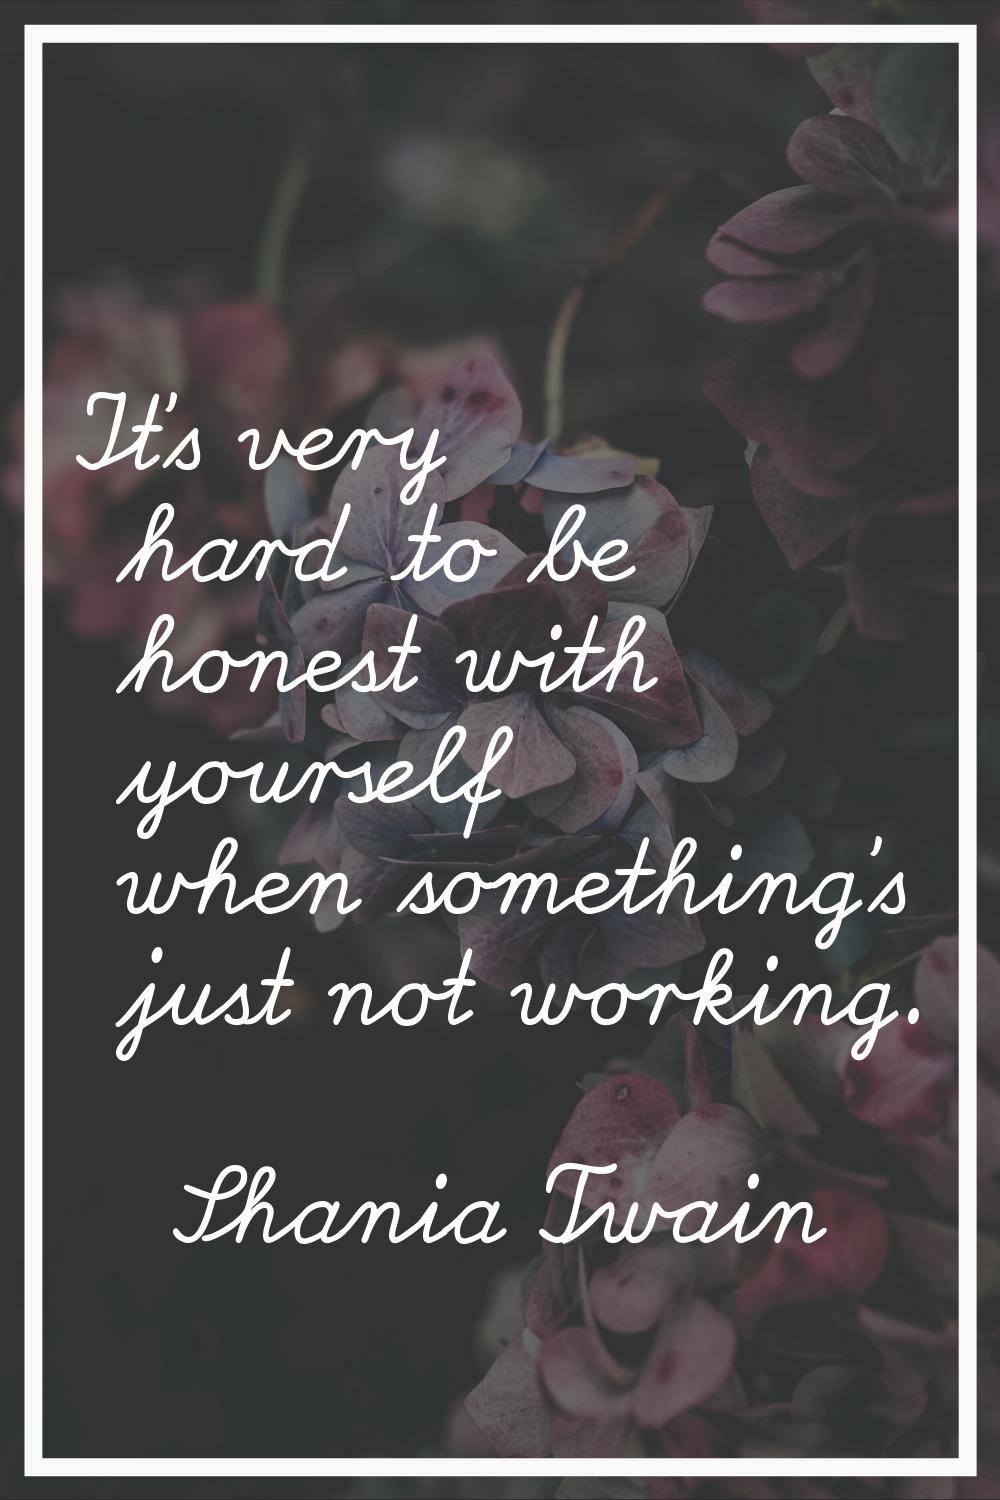 It's very hard to be honest with yourself when something's just not working.